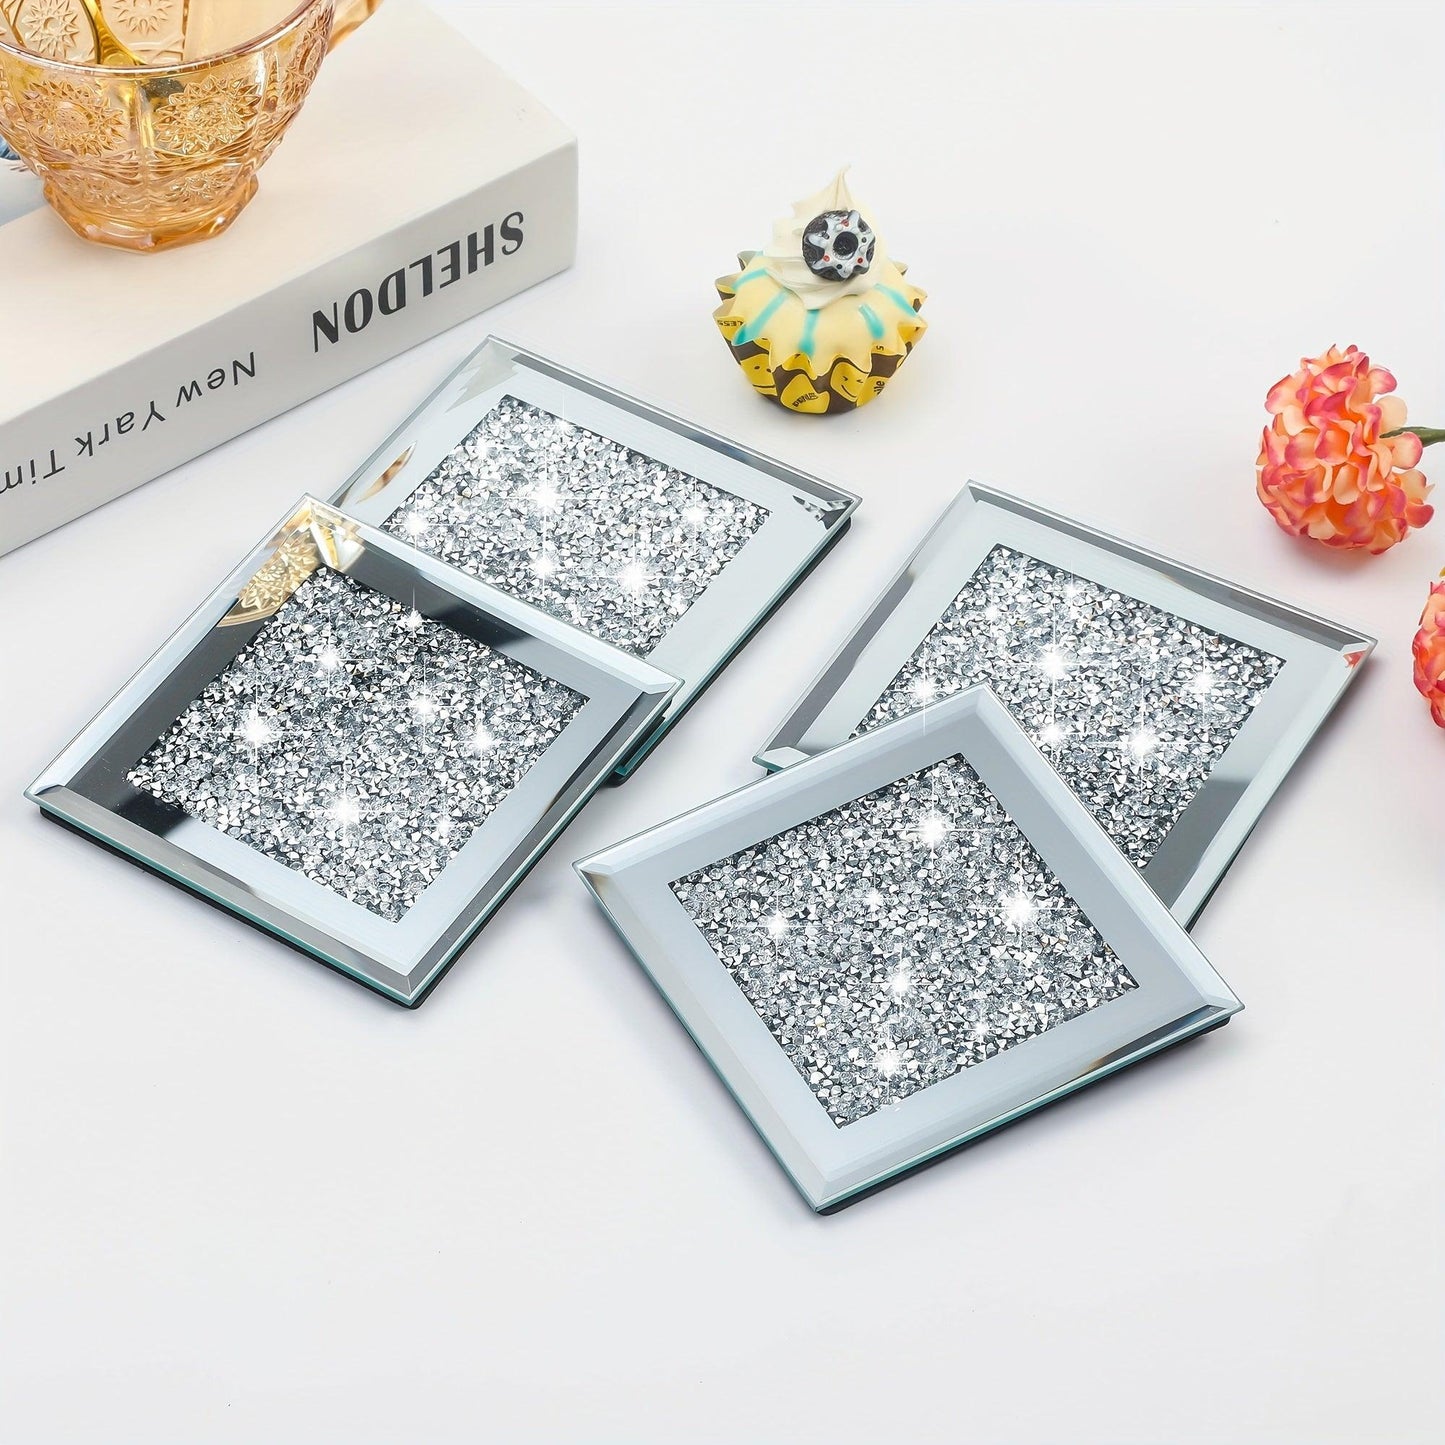 4pcs/set Insulated Glass Coasters with Crushed Diamond Design - Stylish and Durable Drink Mats for Tea, Coffee, and More - J & B's Accessories